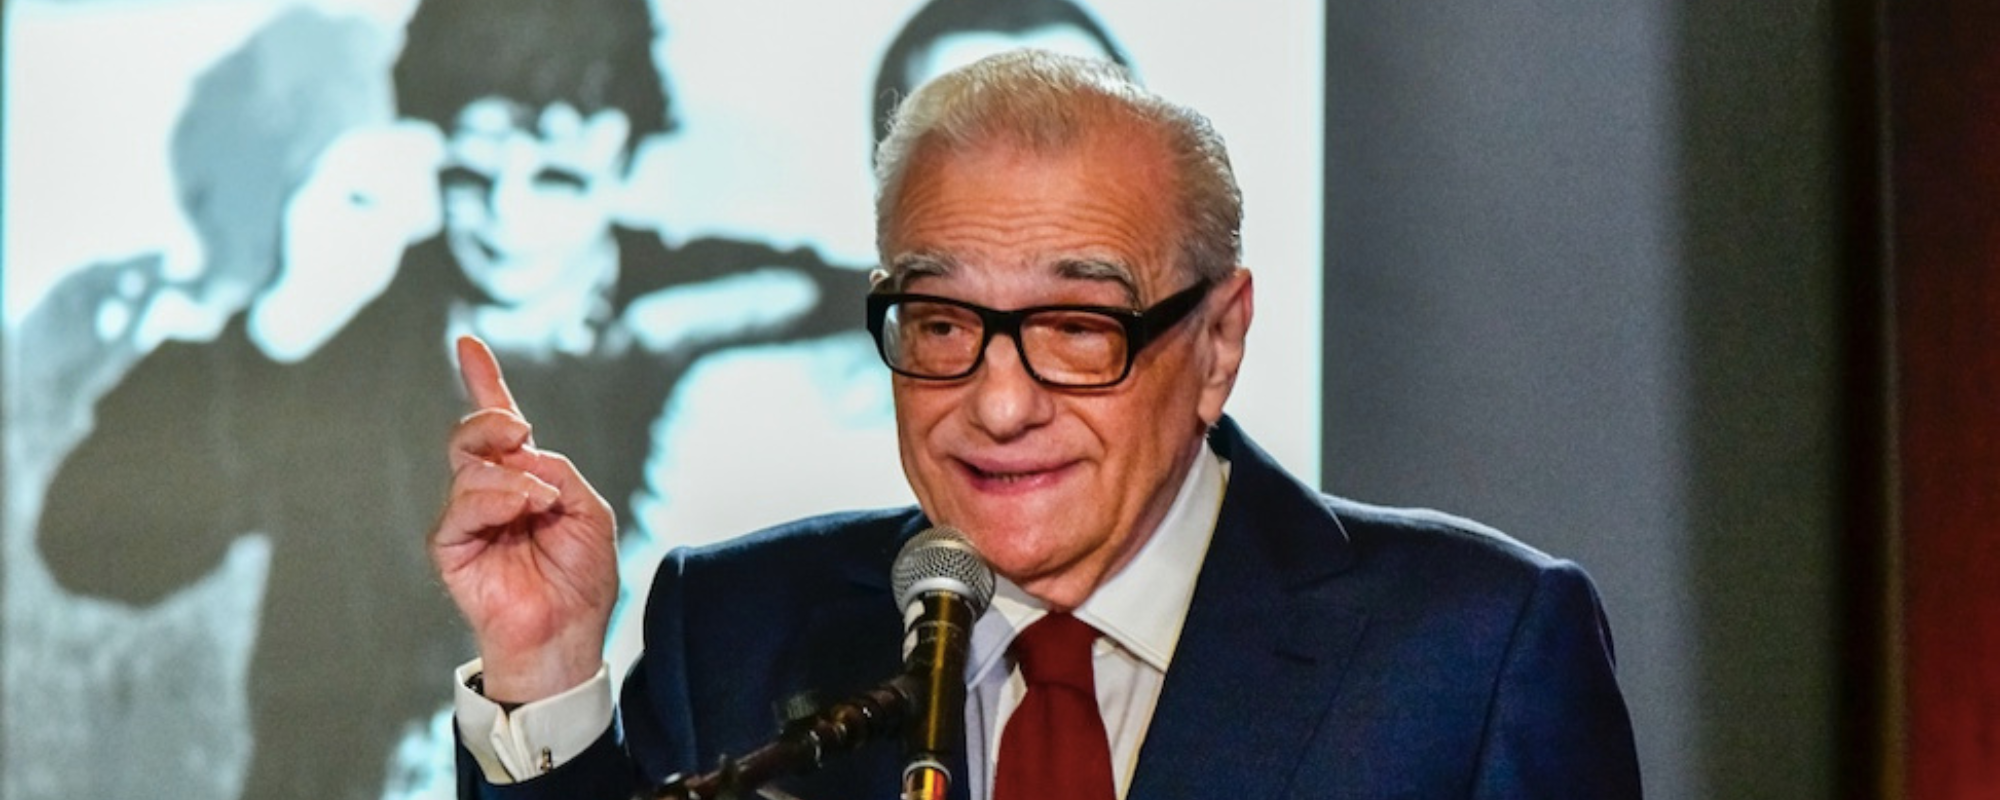 Martin Scorsese Hosted a Tribute Concert for Robbie Robertson with Performances from Jackson Browne, Jason Isbell, and More